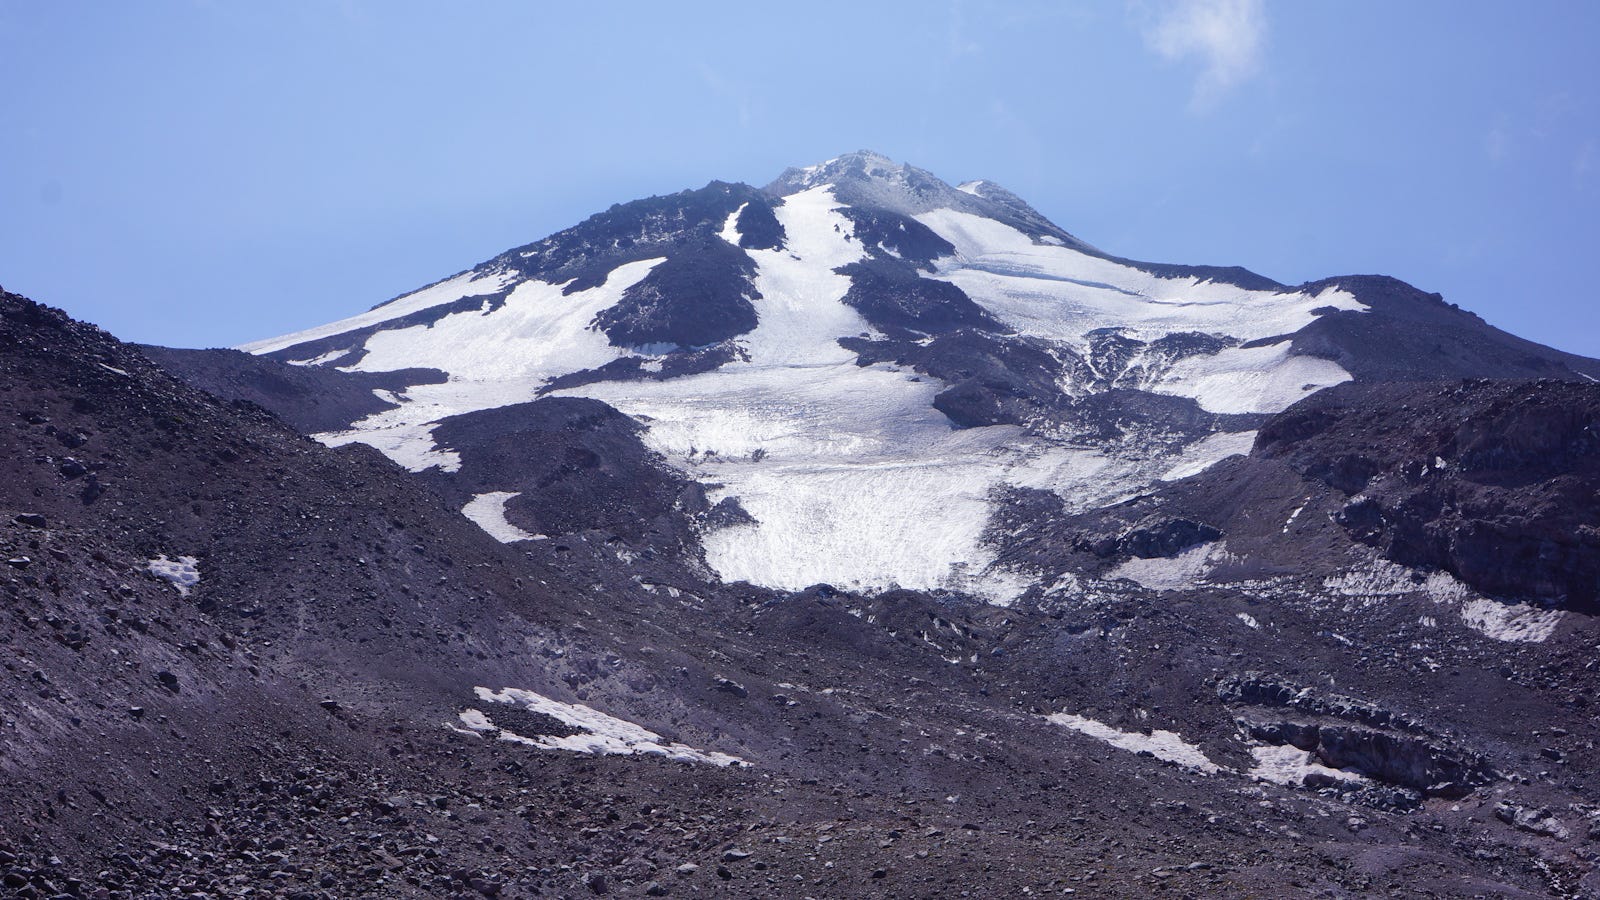 The Bolam Glacier is located on the north side of Mt. Shasta.